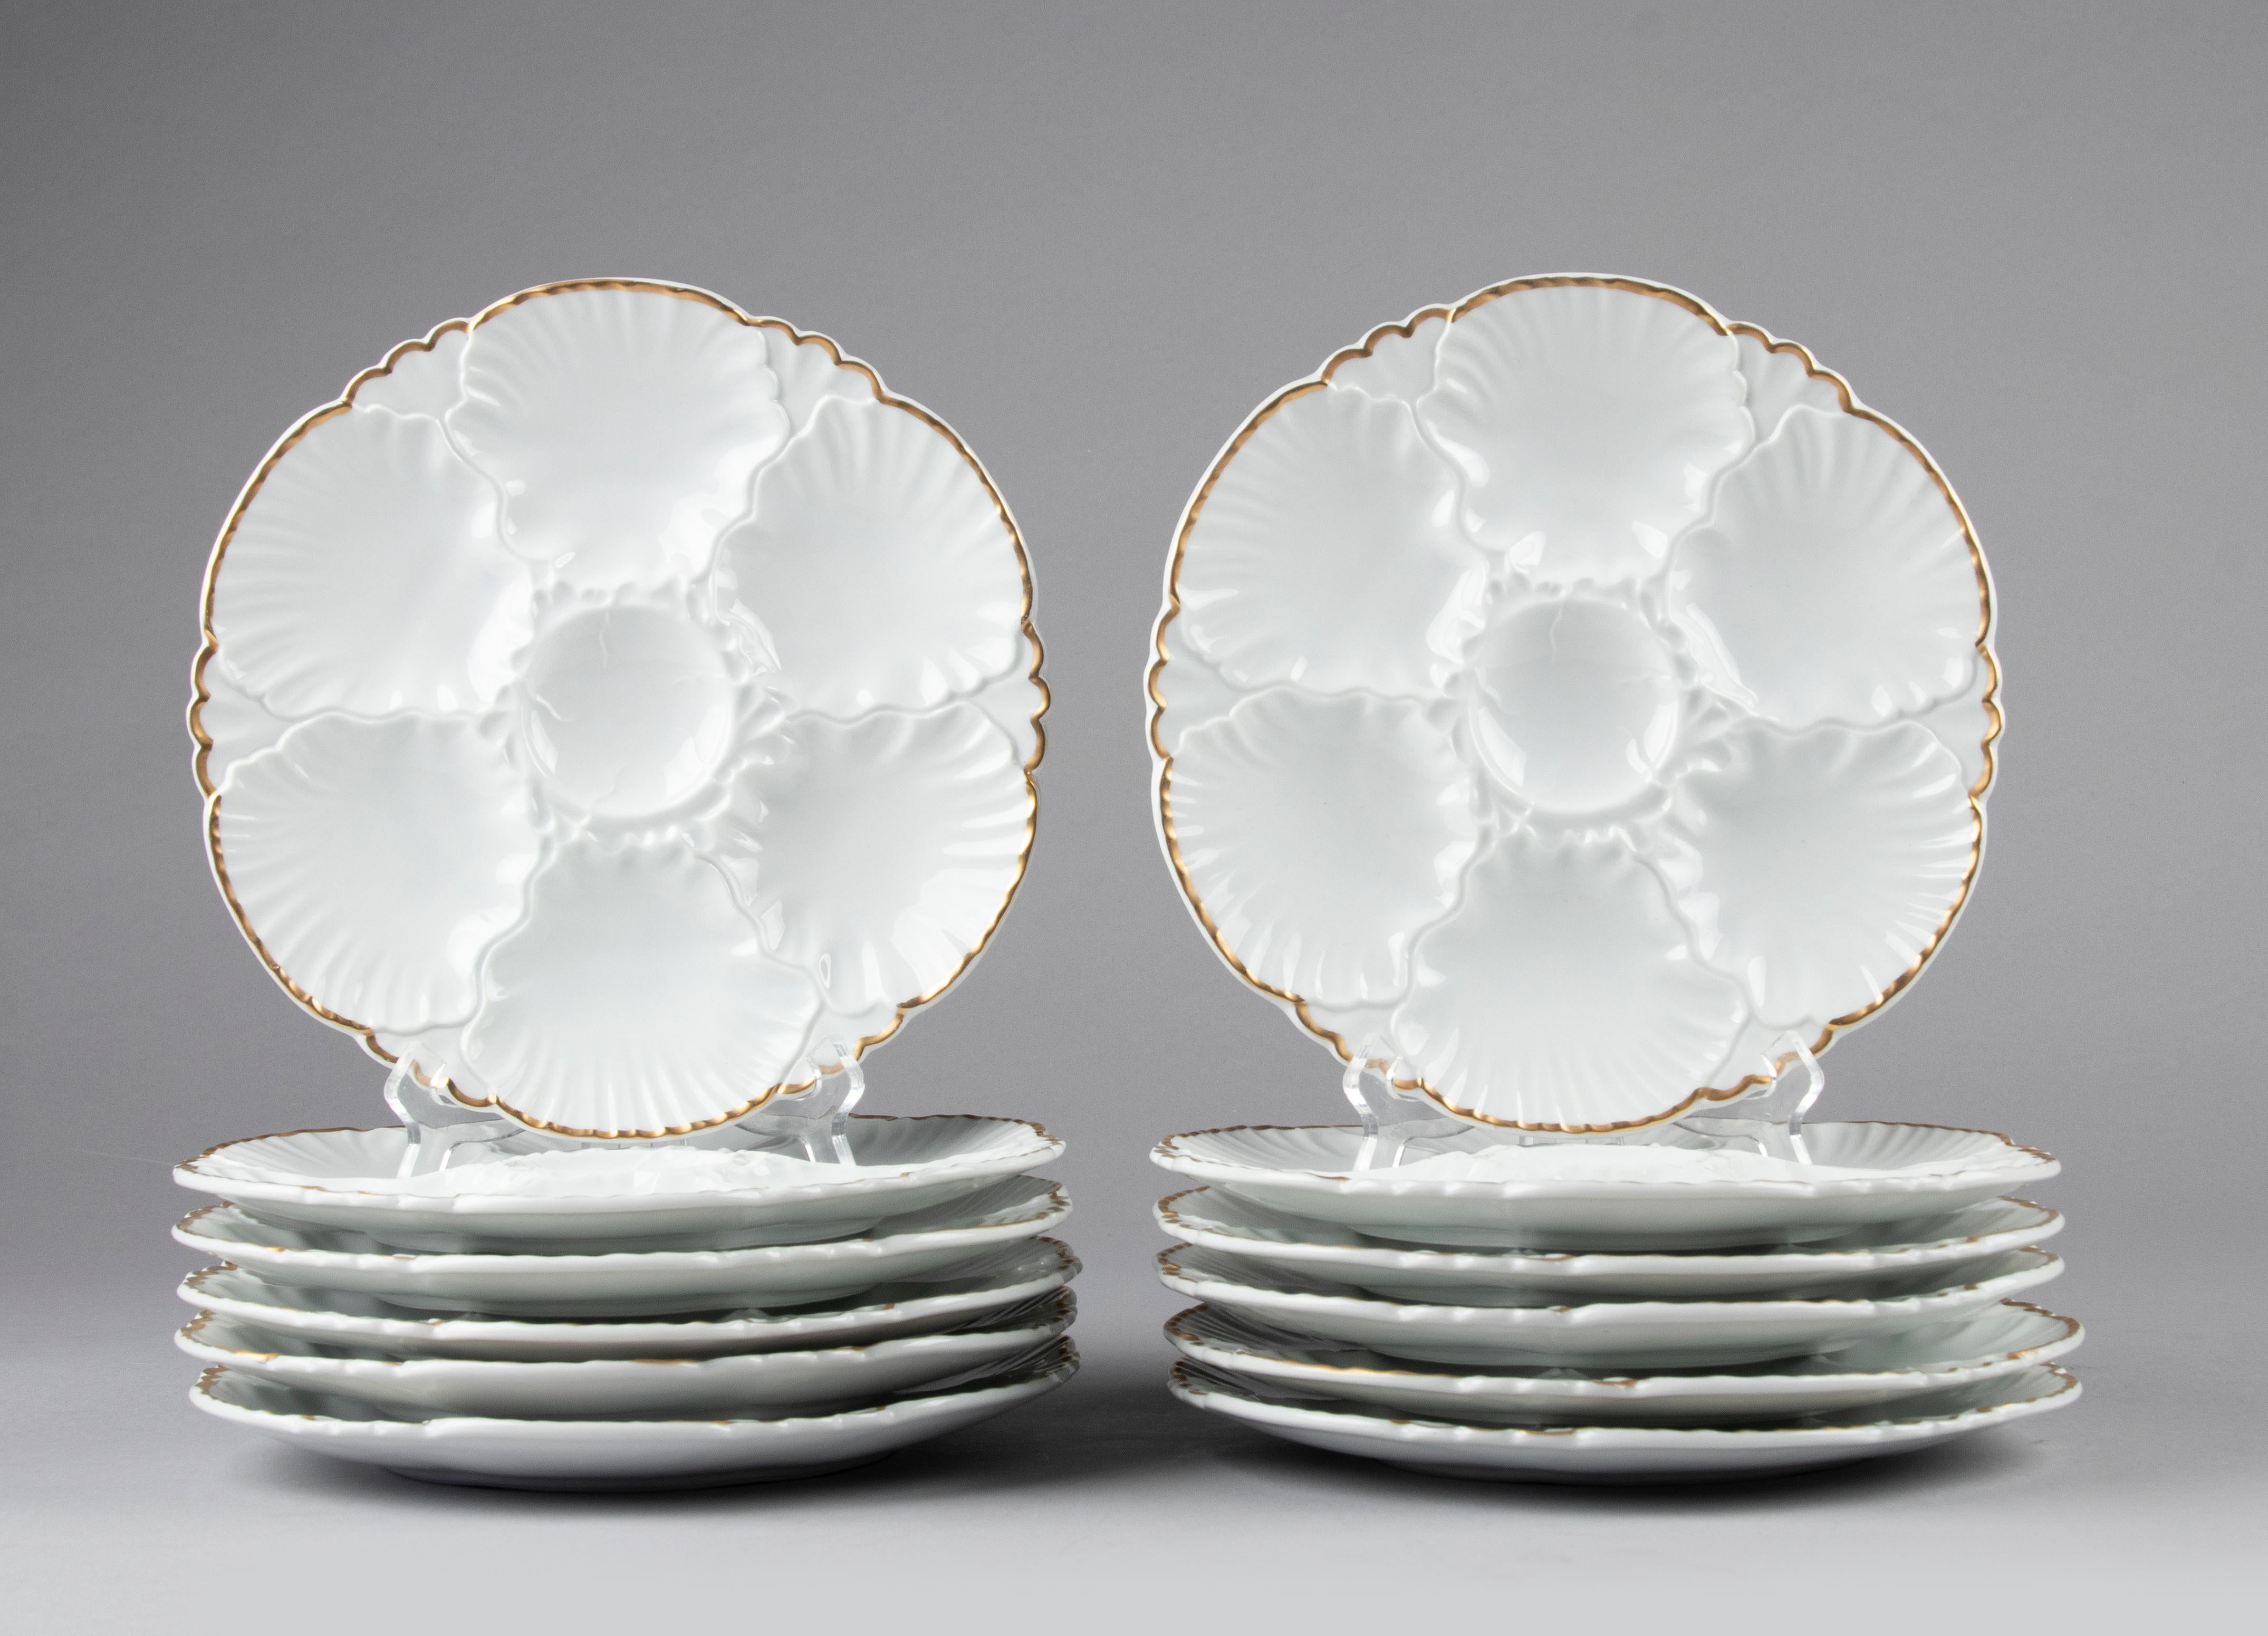 Nice set of 12 porcelain oyster plates from the Belgian brand Cerabel Porcelaine de Baudour.
The plates are white in color, beautifully shaped with a relief pattern and gold-coloured edges. Each plate has room for 6 oysters.
The plates are in very